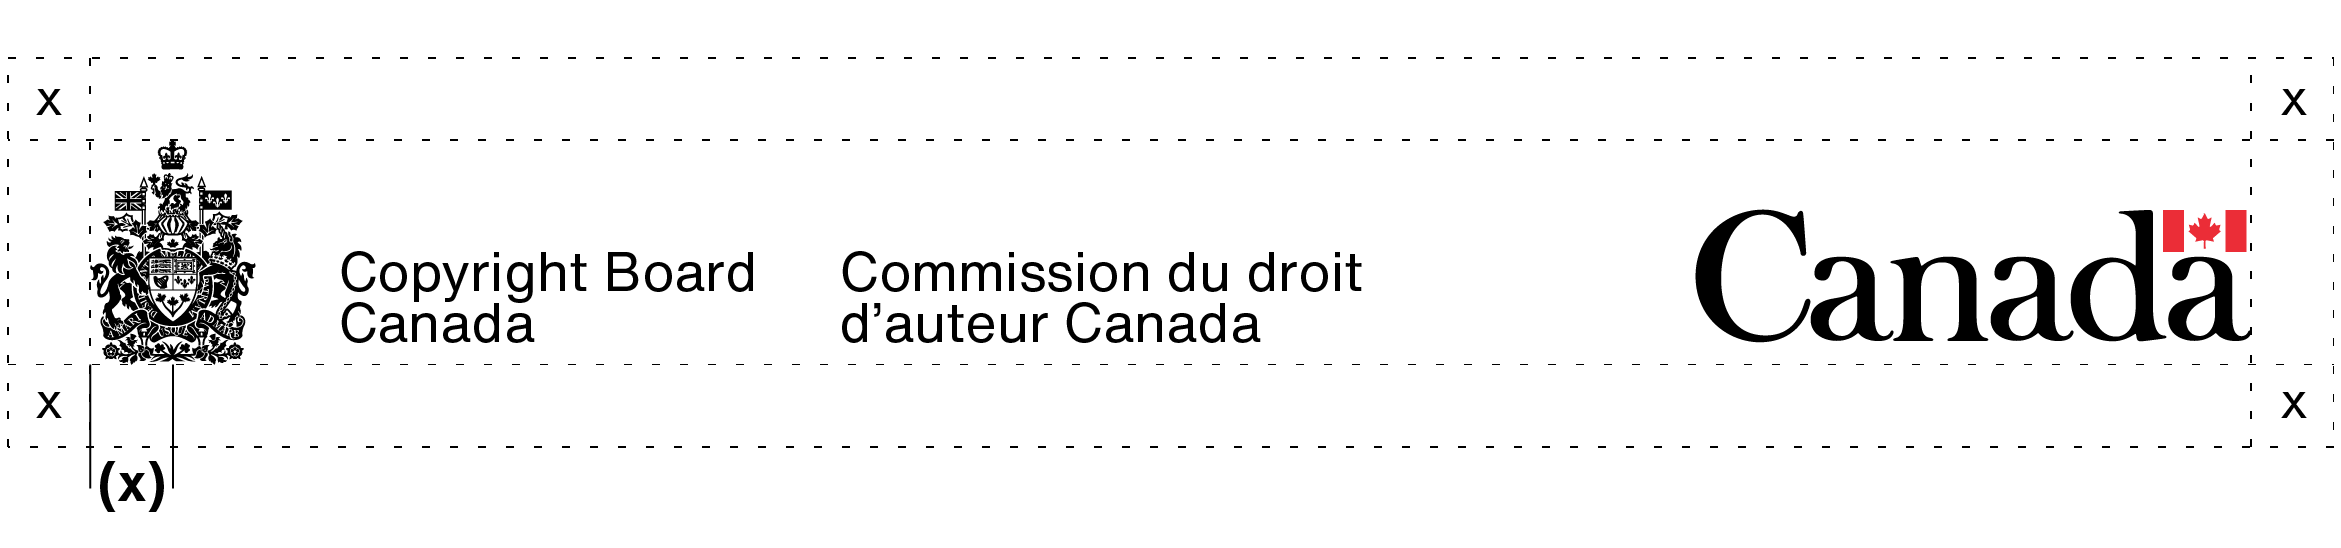 The clear space required around the Copyright Board Canada arms signature and the Canada wordmark. The clear space required is explained in the text above.